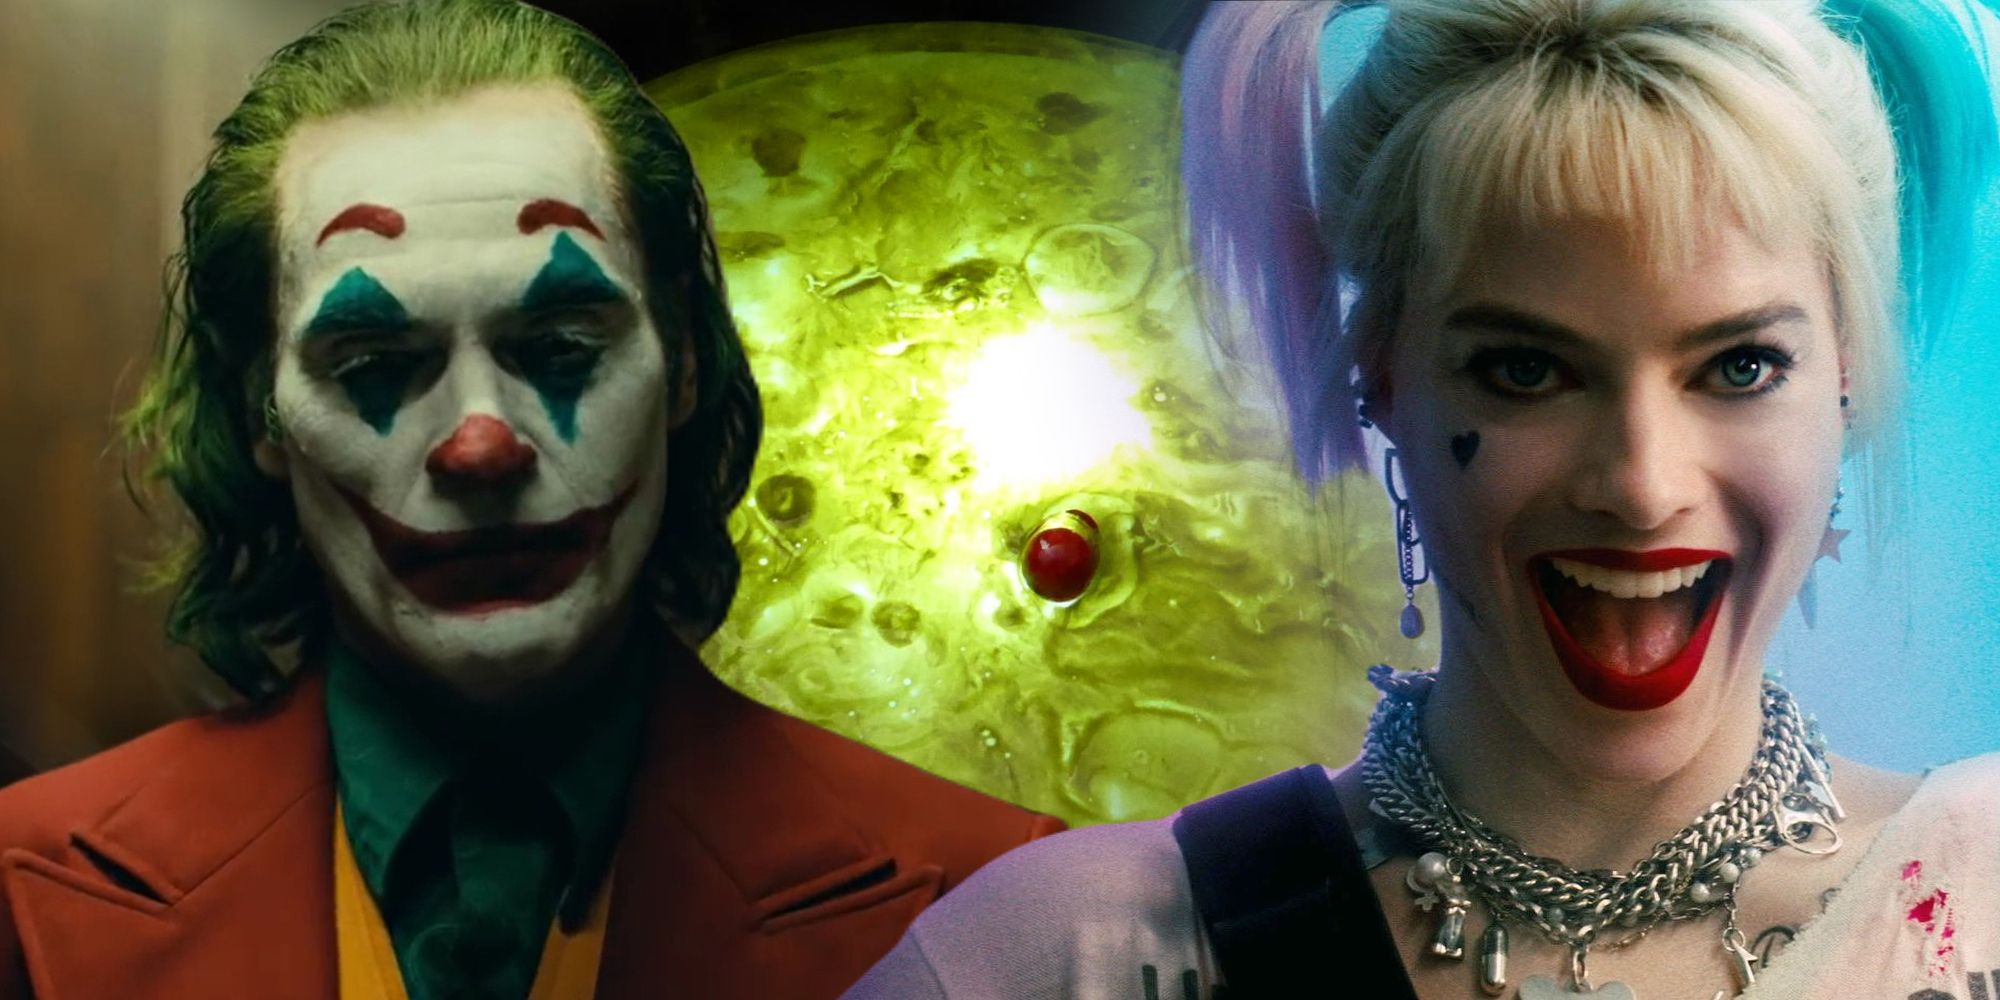 (Left) Joaquin Phoenix as The Joker wears a full face of clown makeup with his characteristic green hair, looking morosely at the ground. / (Center) A vat of green chemicals. / (Right) Margot Robbie as Harley Quinn with her pink and blue short bunches, grinning maniacally.